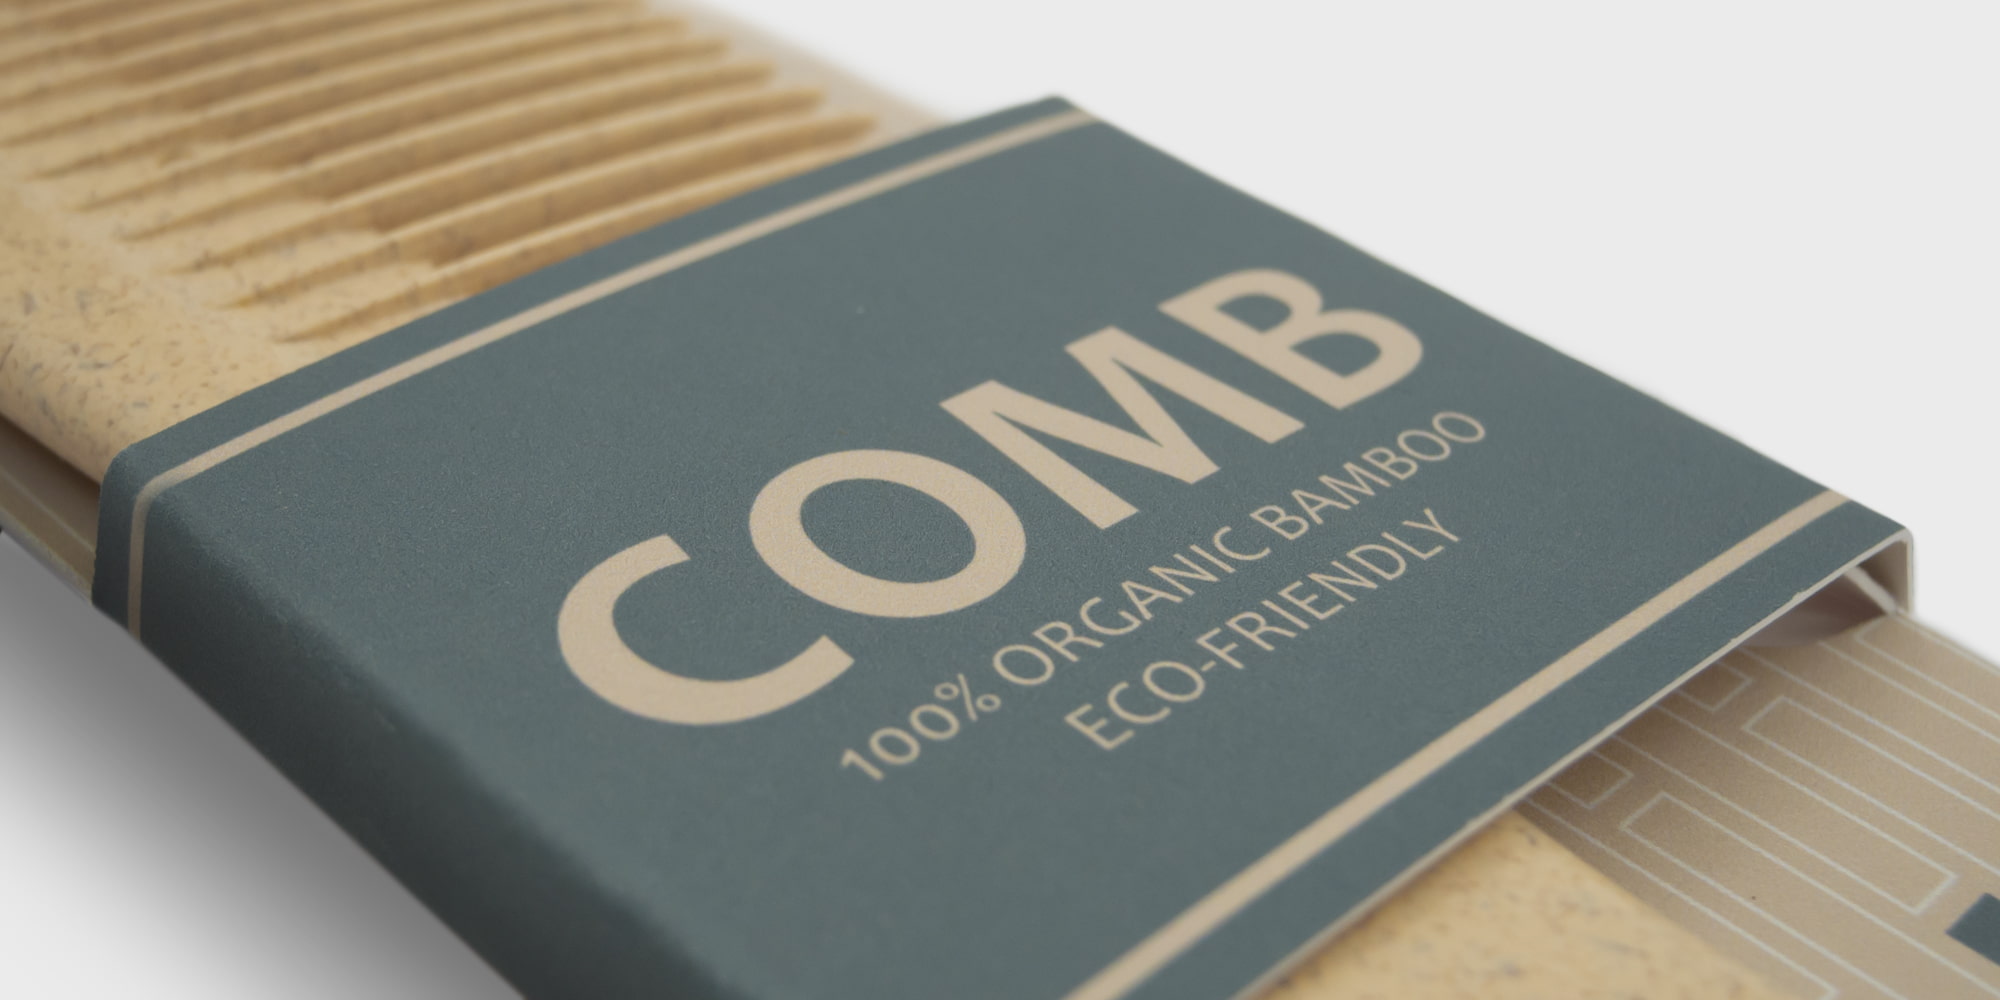 Bamboo Paper Packaging - Comb Card